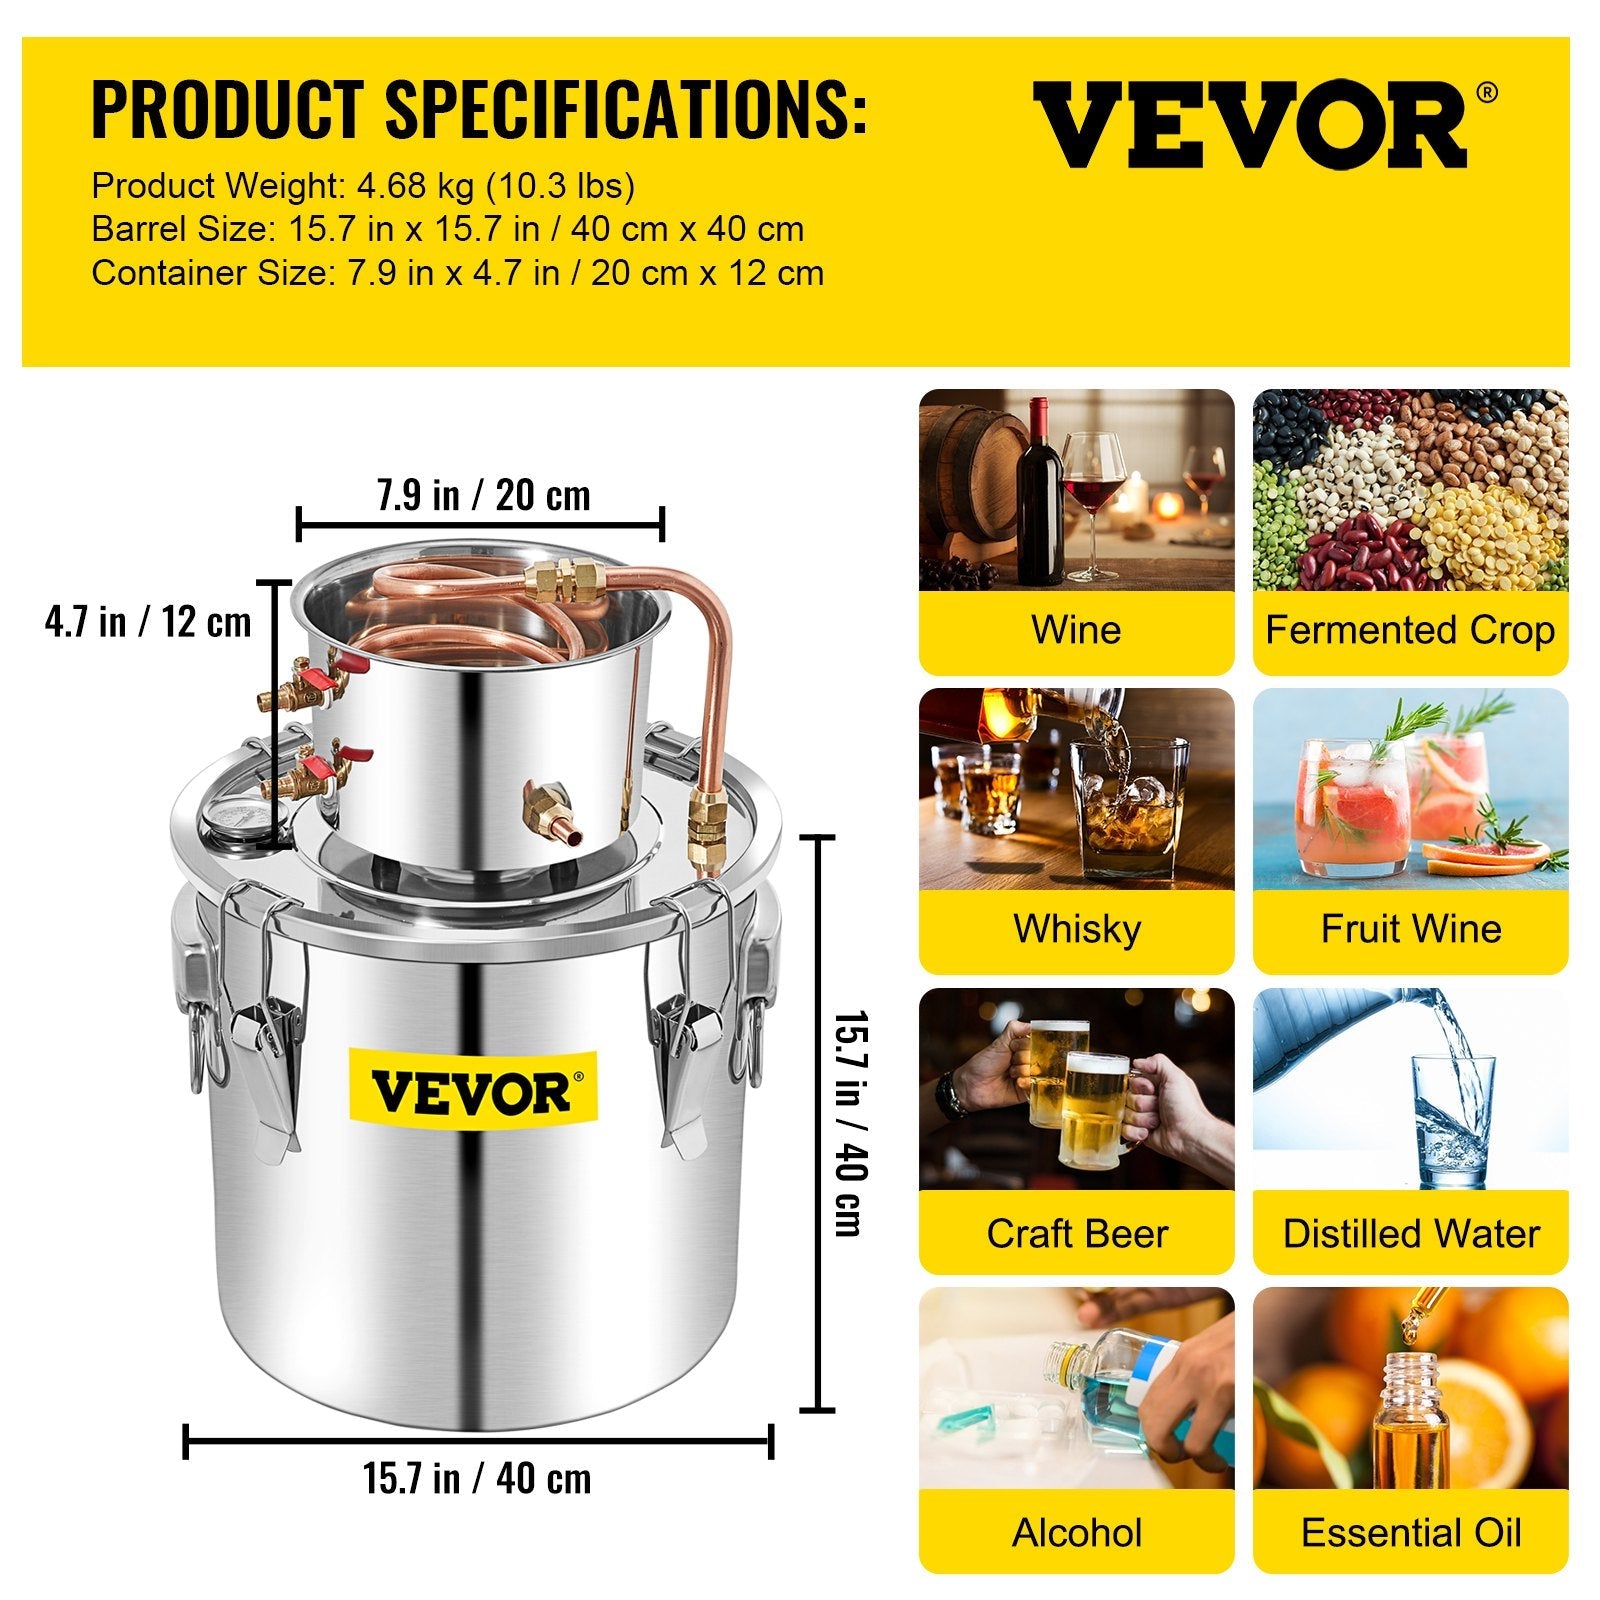 VEVOR Alcohol Still, 50L Distillery Kit w/Condenser & Pump, 13.2Gal Alcohol Still w/Copper Tube, Whiskey Distilling Kit w/Build-in Thermometer, Whiskey Making Kit for DIY Alcohol, Stainless Steel-5